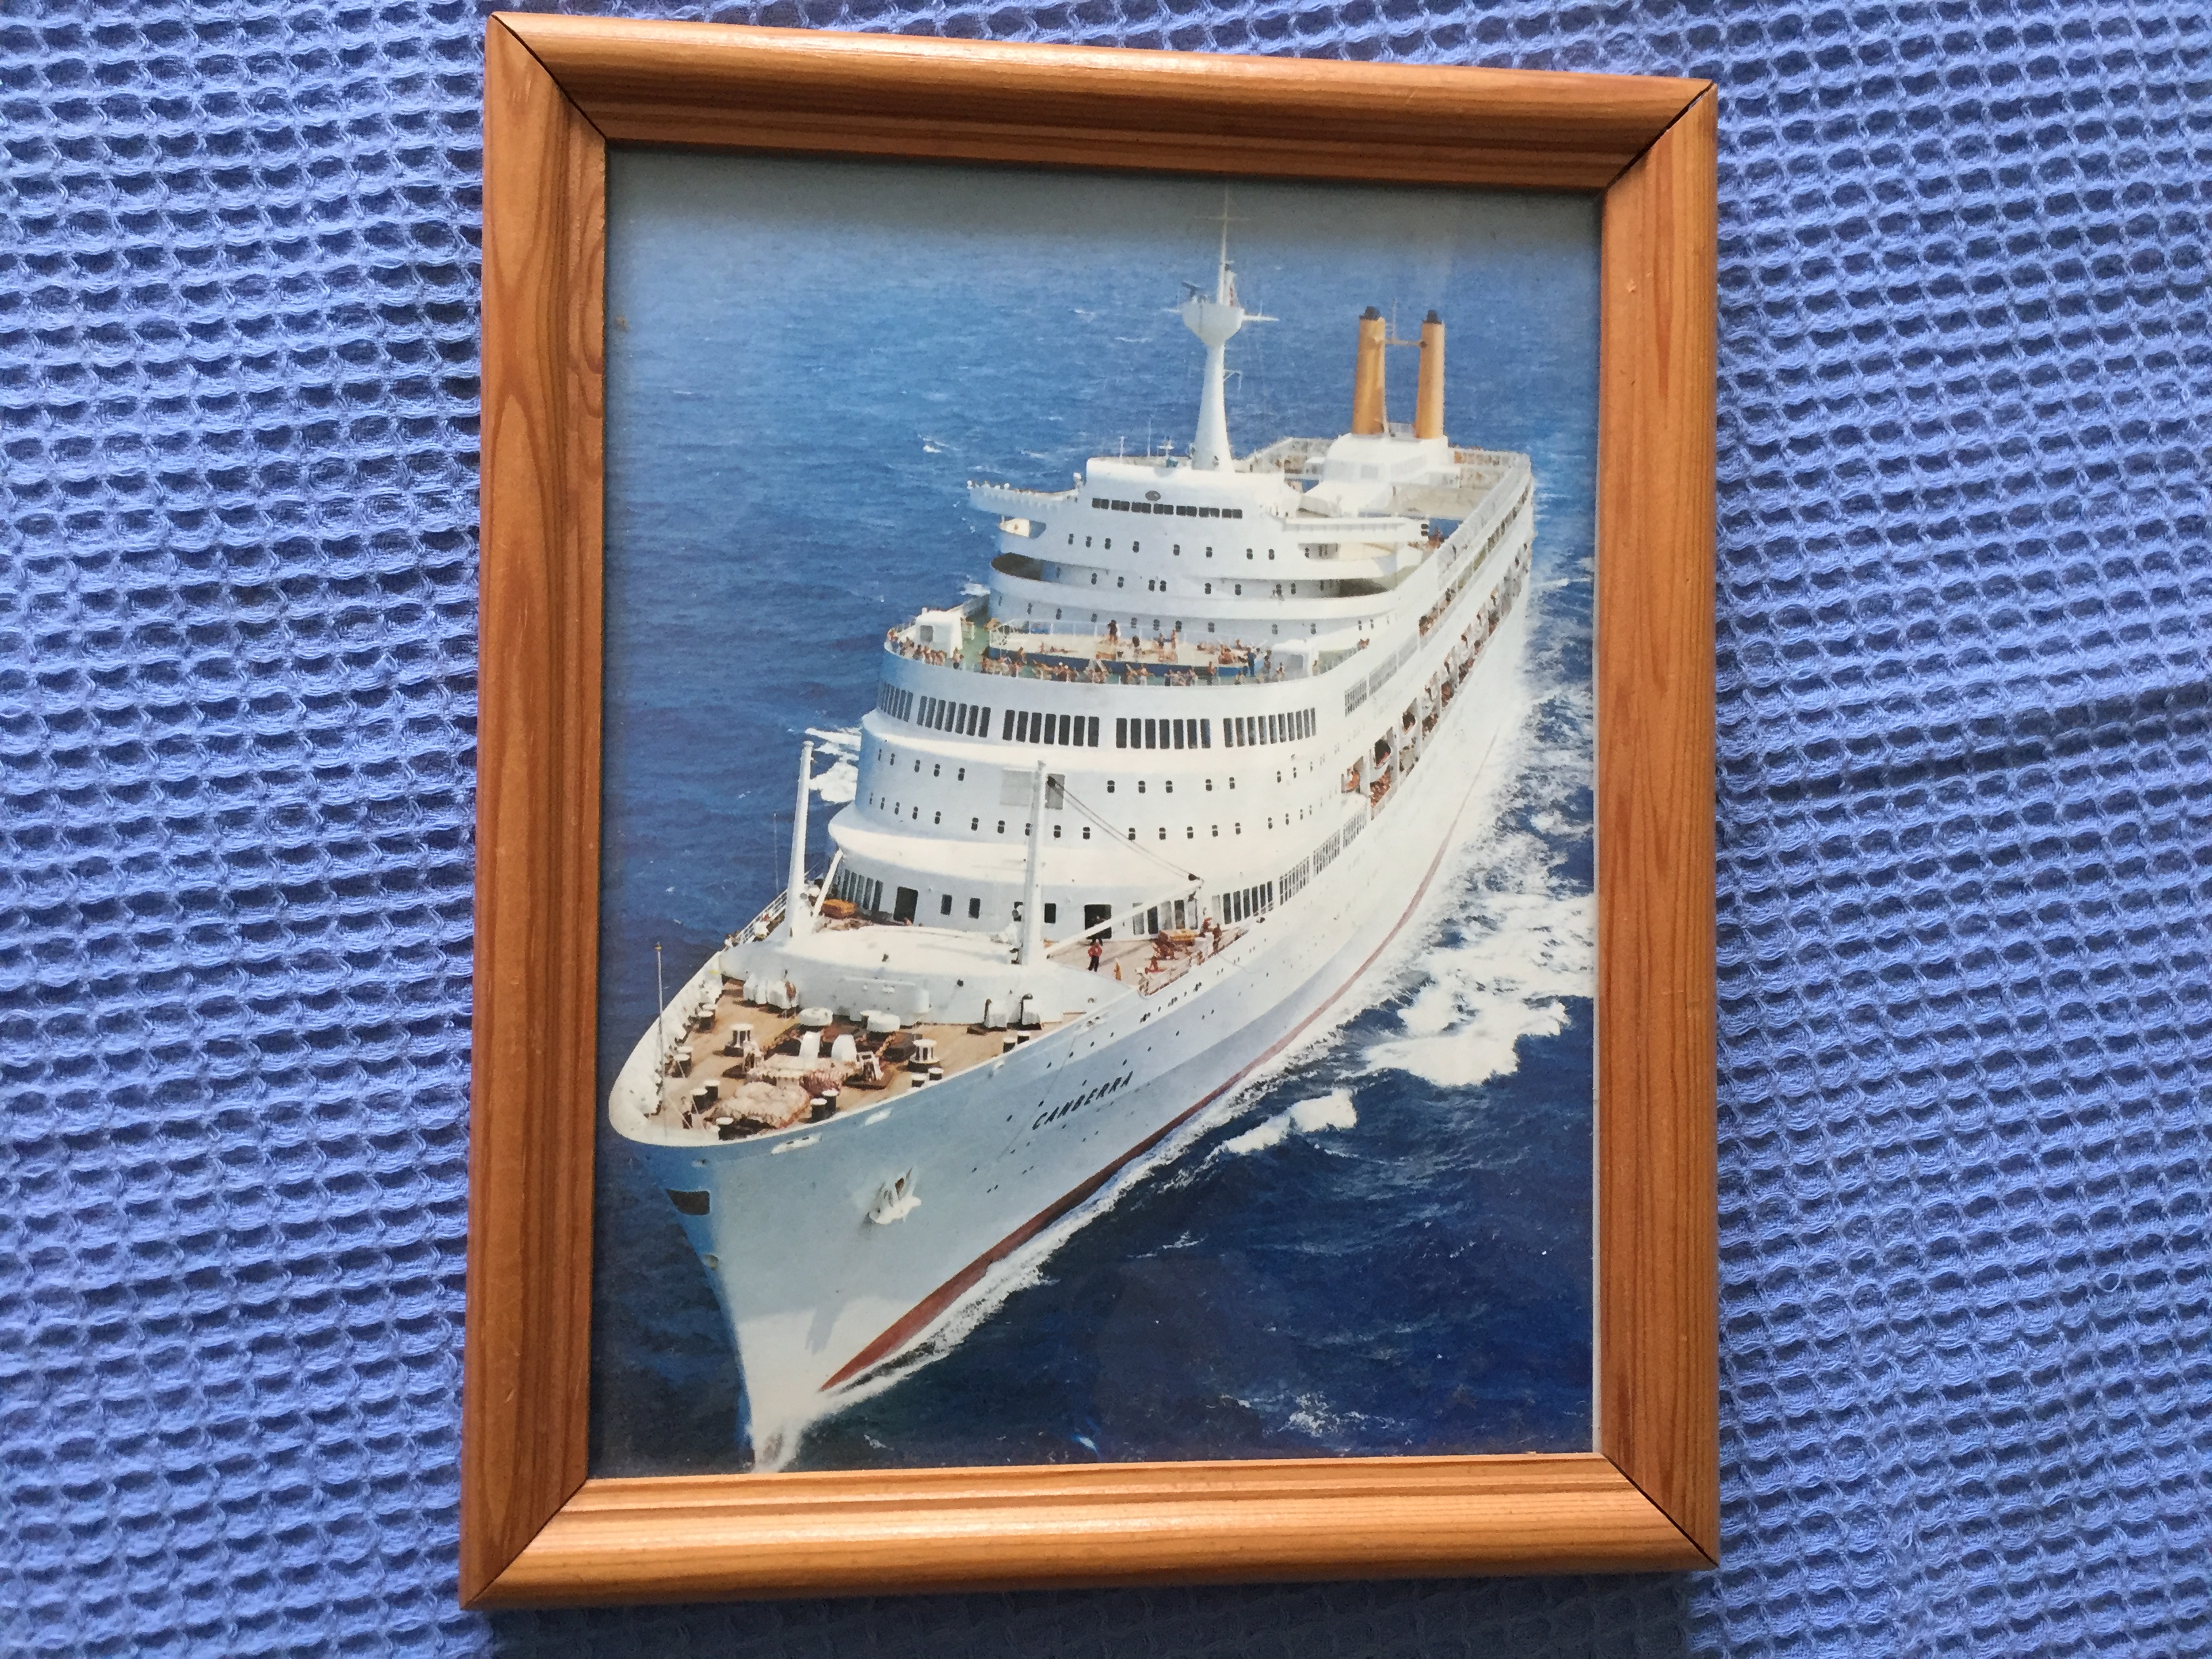 FRAMED PHOTO OF THE FAMOUS OLD VESSEL THE CANBERRA FROM THE P&O LINE